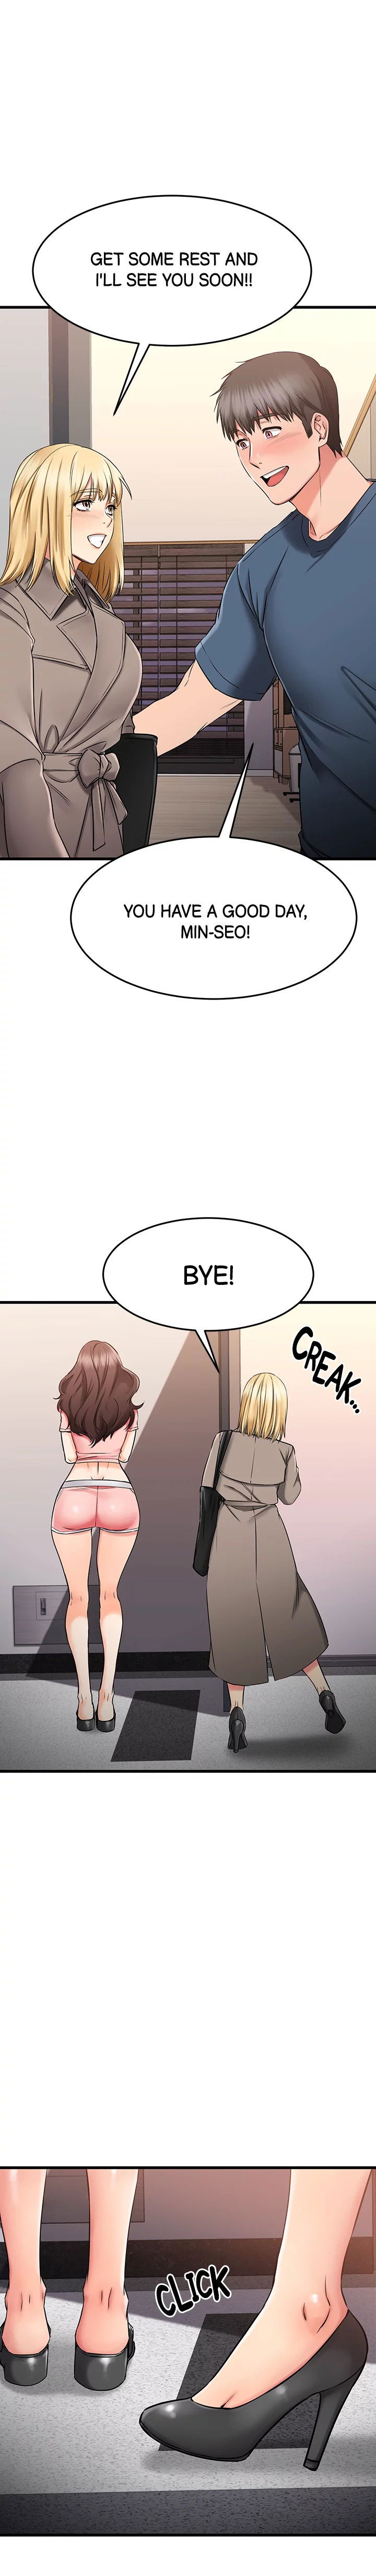 my-female-friend-who-crossed-the-line-chap-33-2